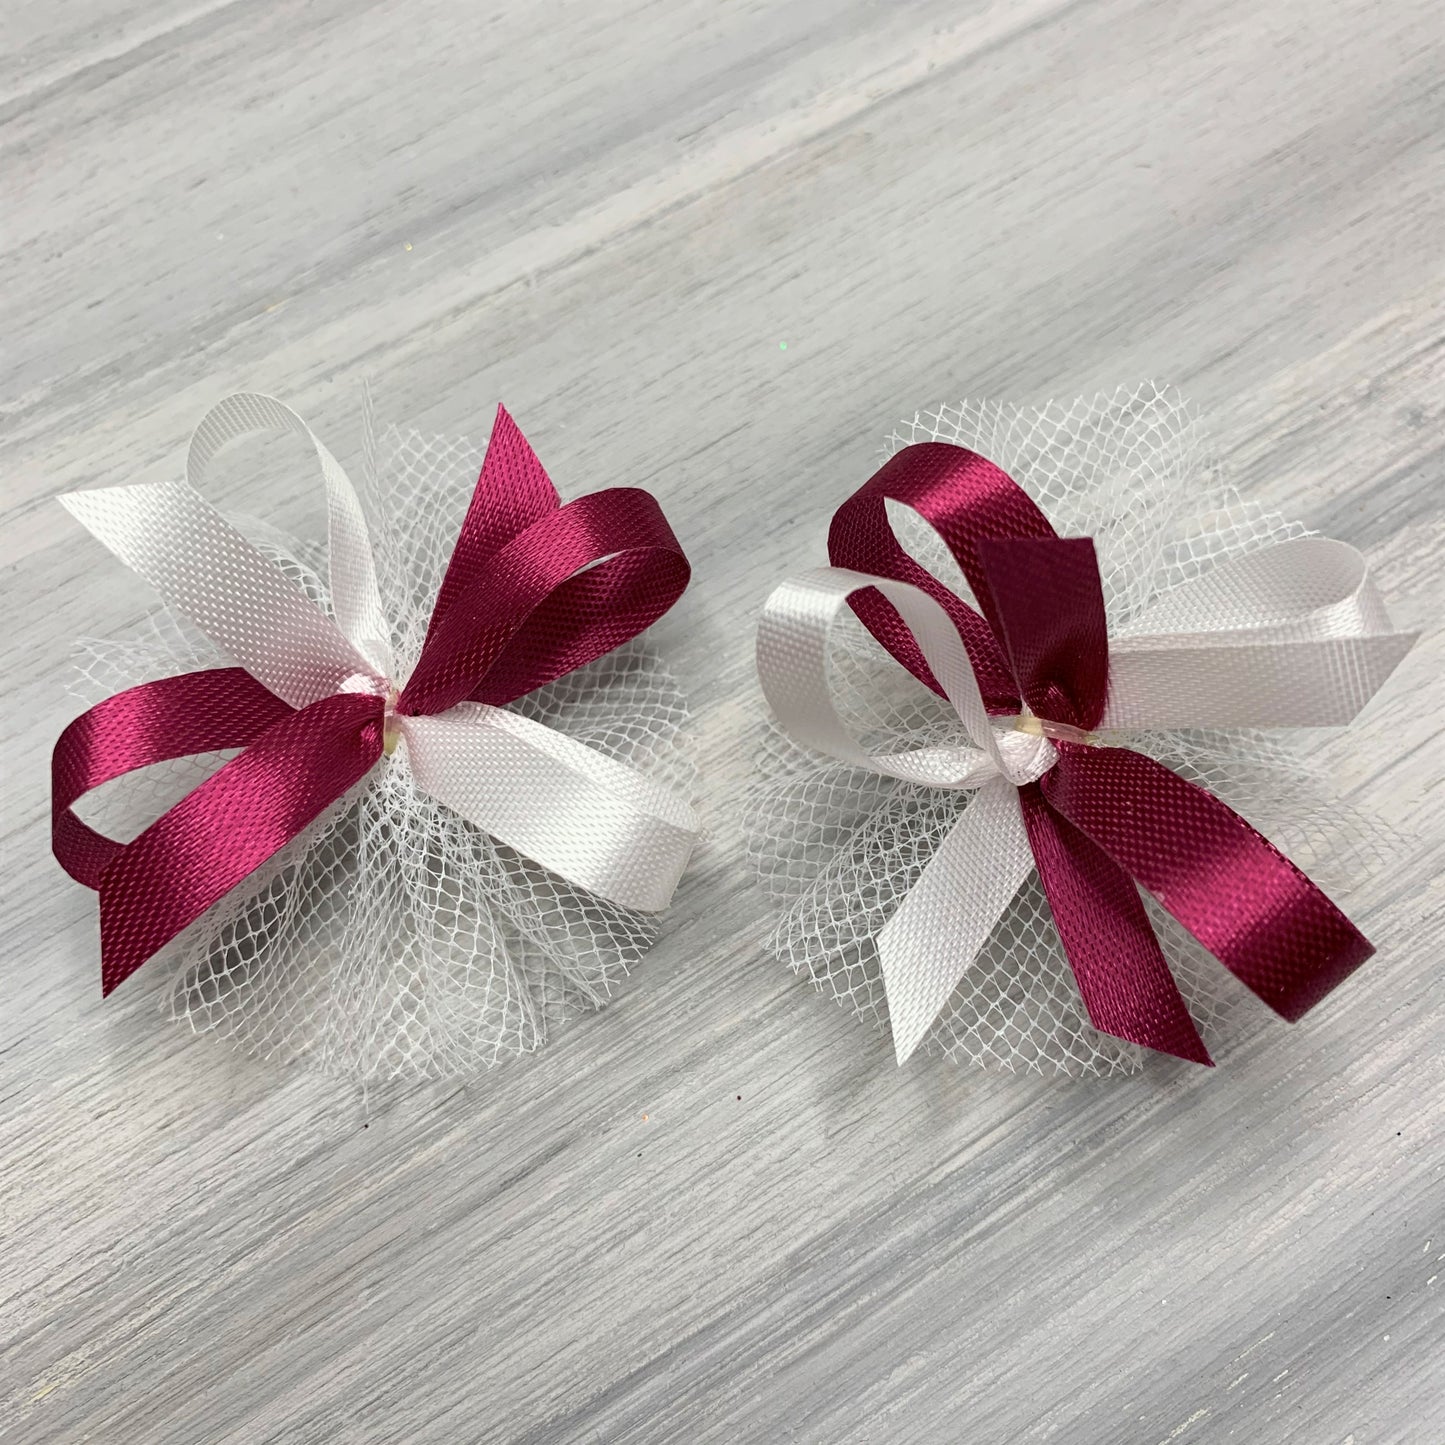 High School & College Color Bows - Burgundy and White - 30 Bows